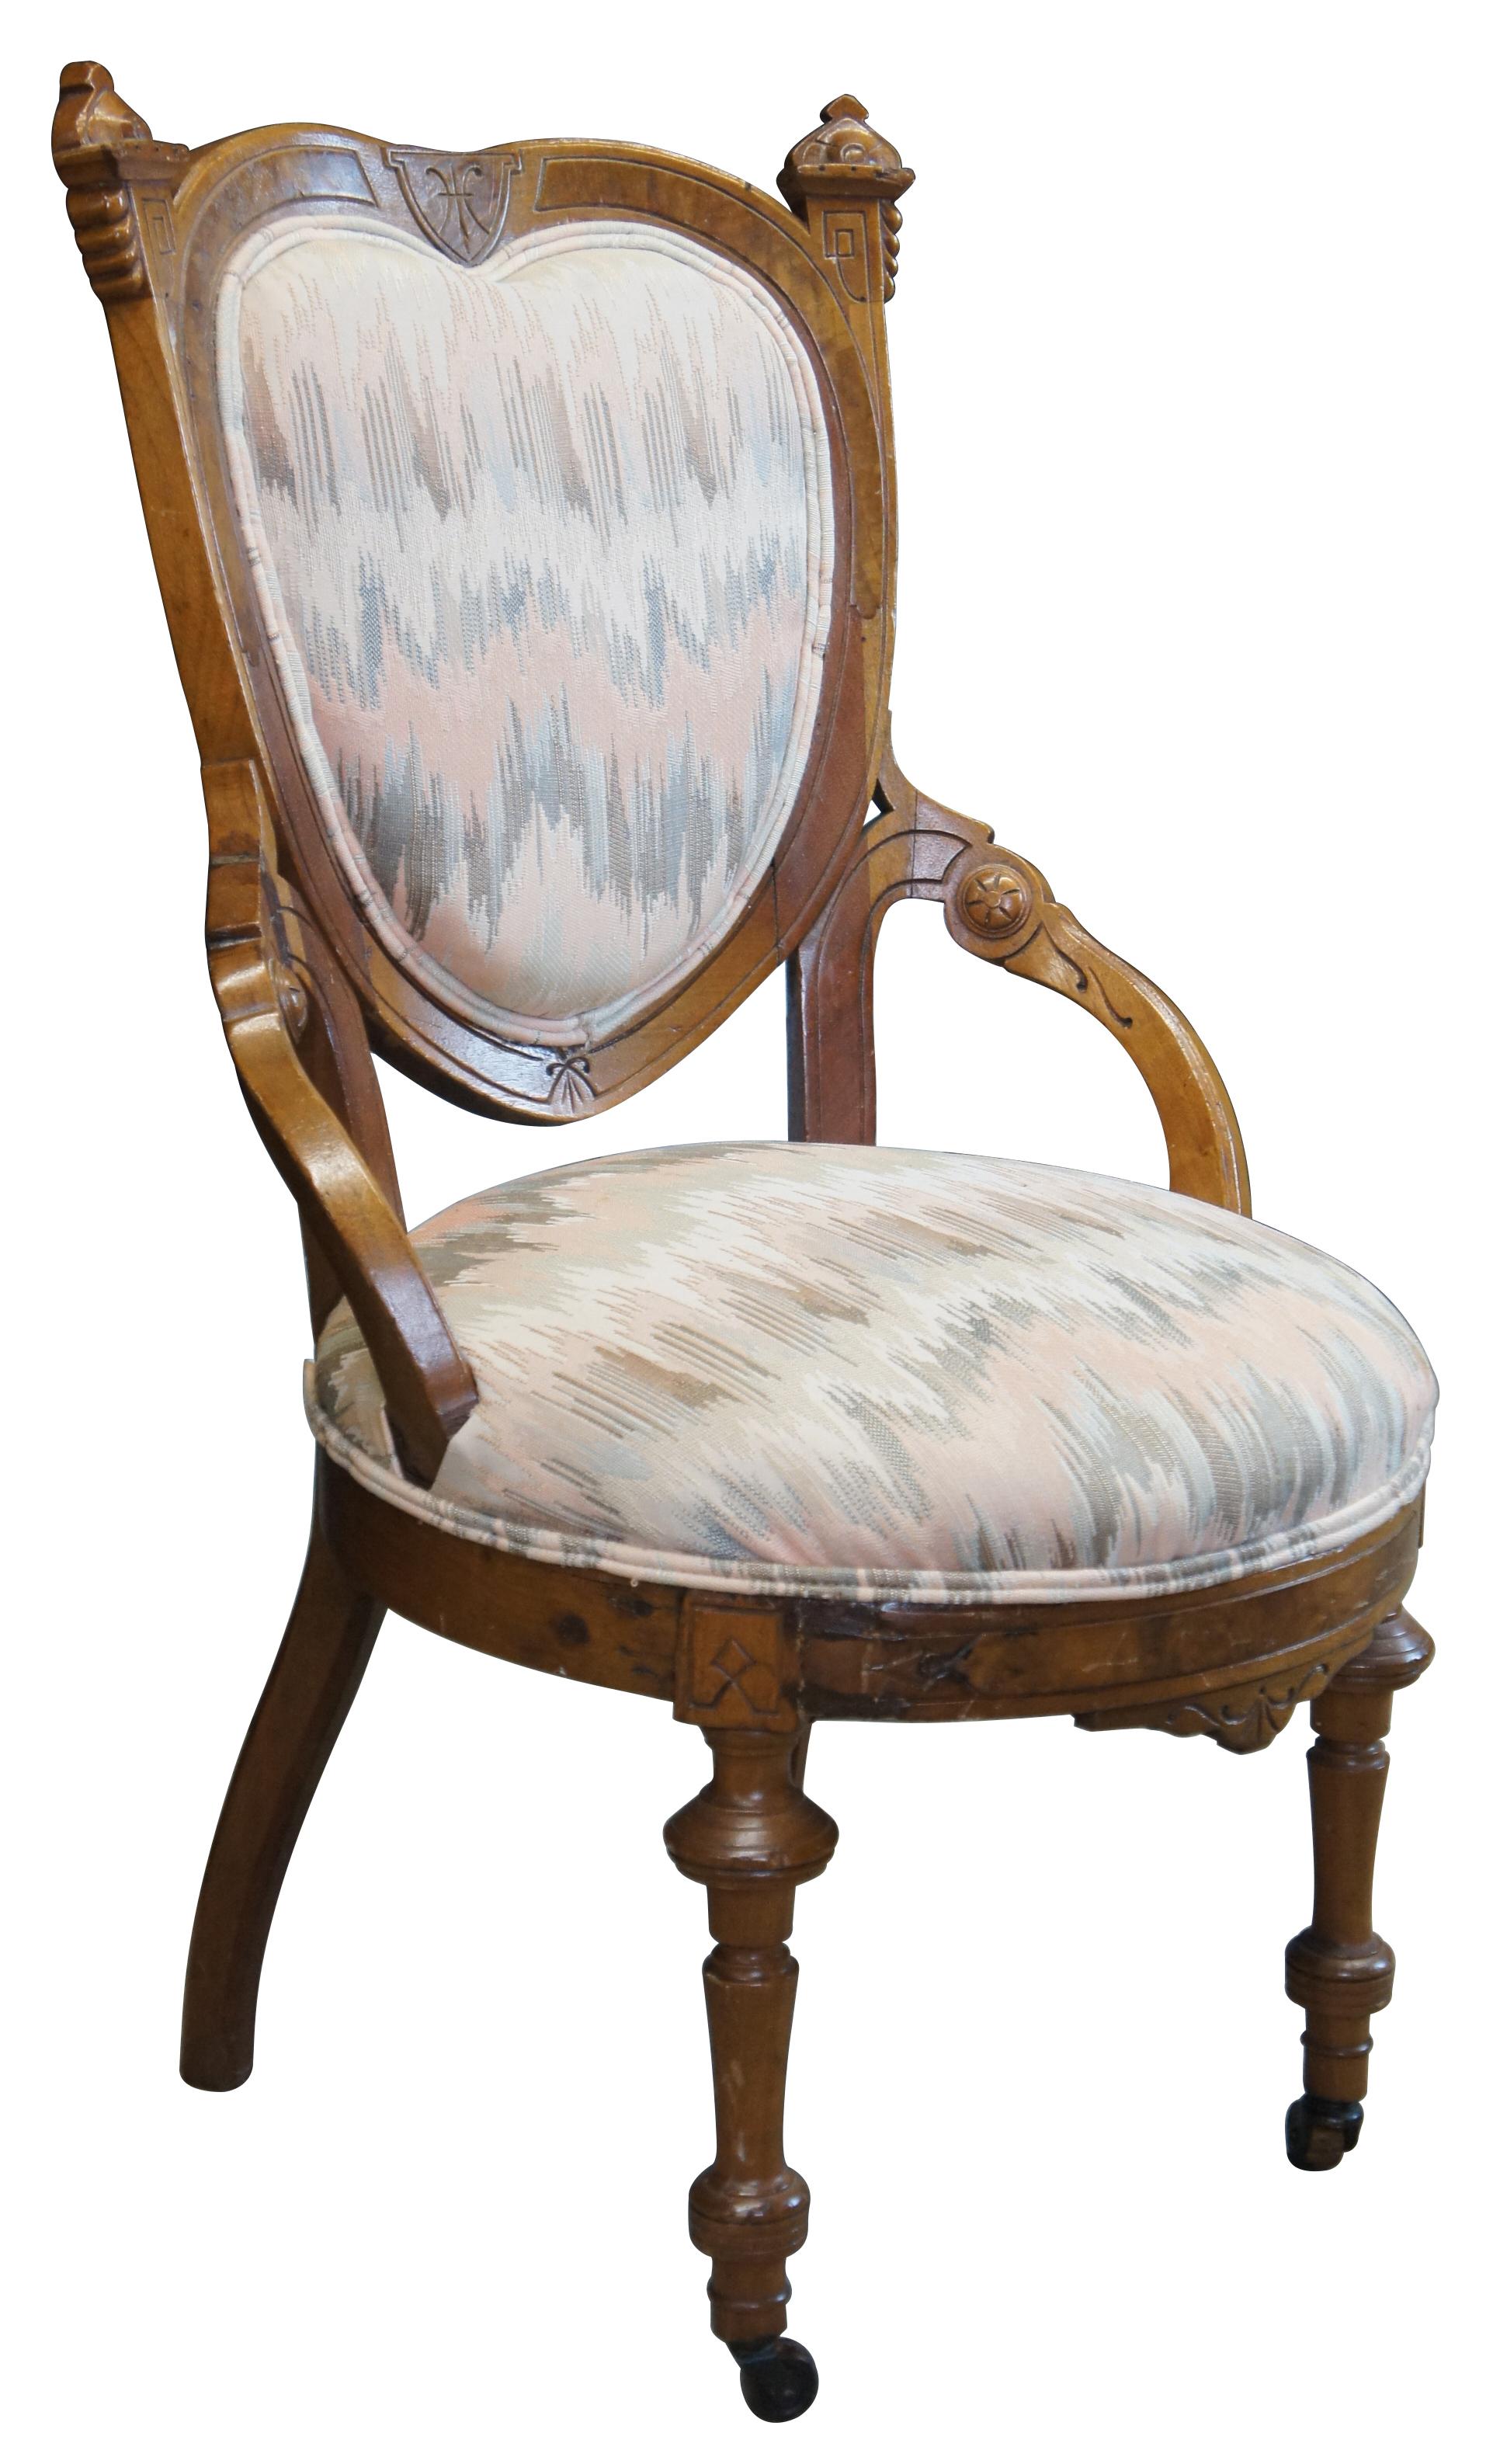 Antique 19th century Eastlake Victorian parlor chair. Made of walnut featuring ballooned heart shape back and turned and carved accents.
 